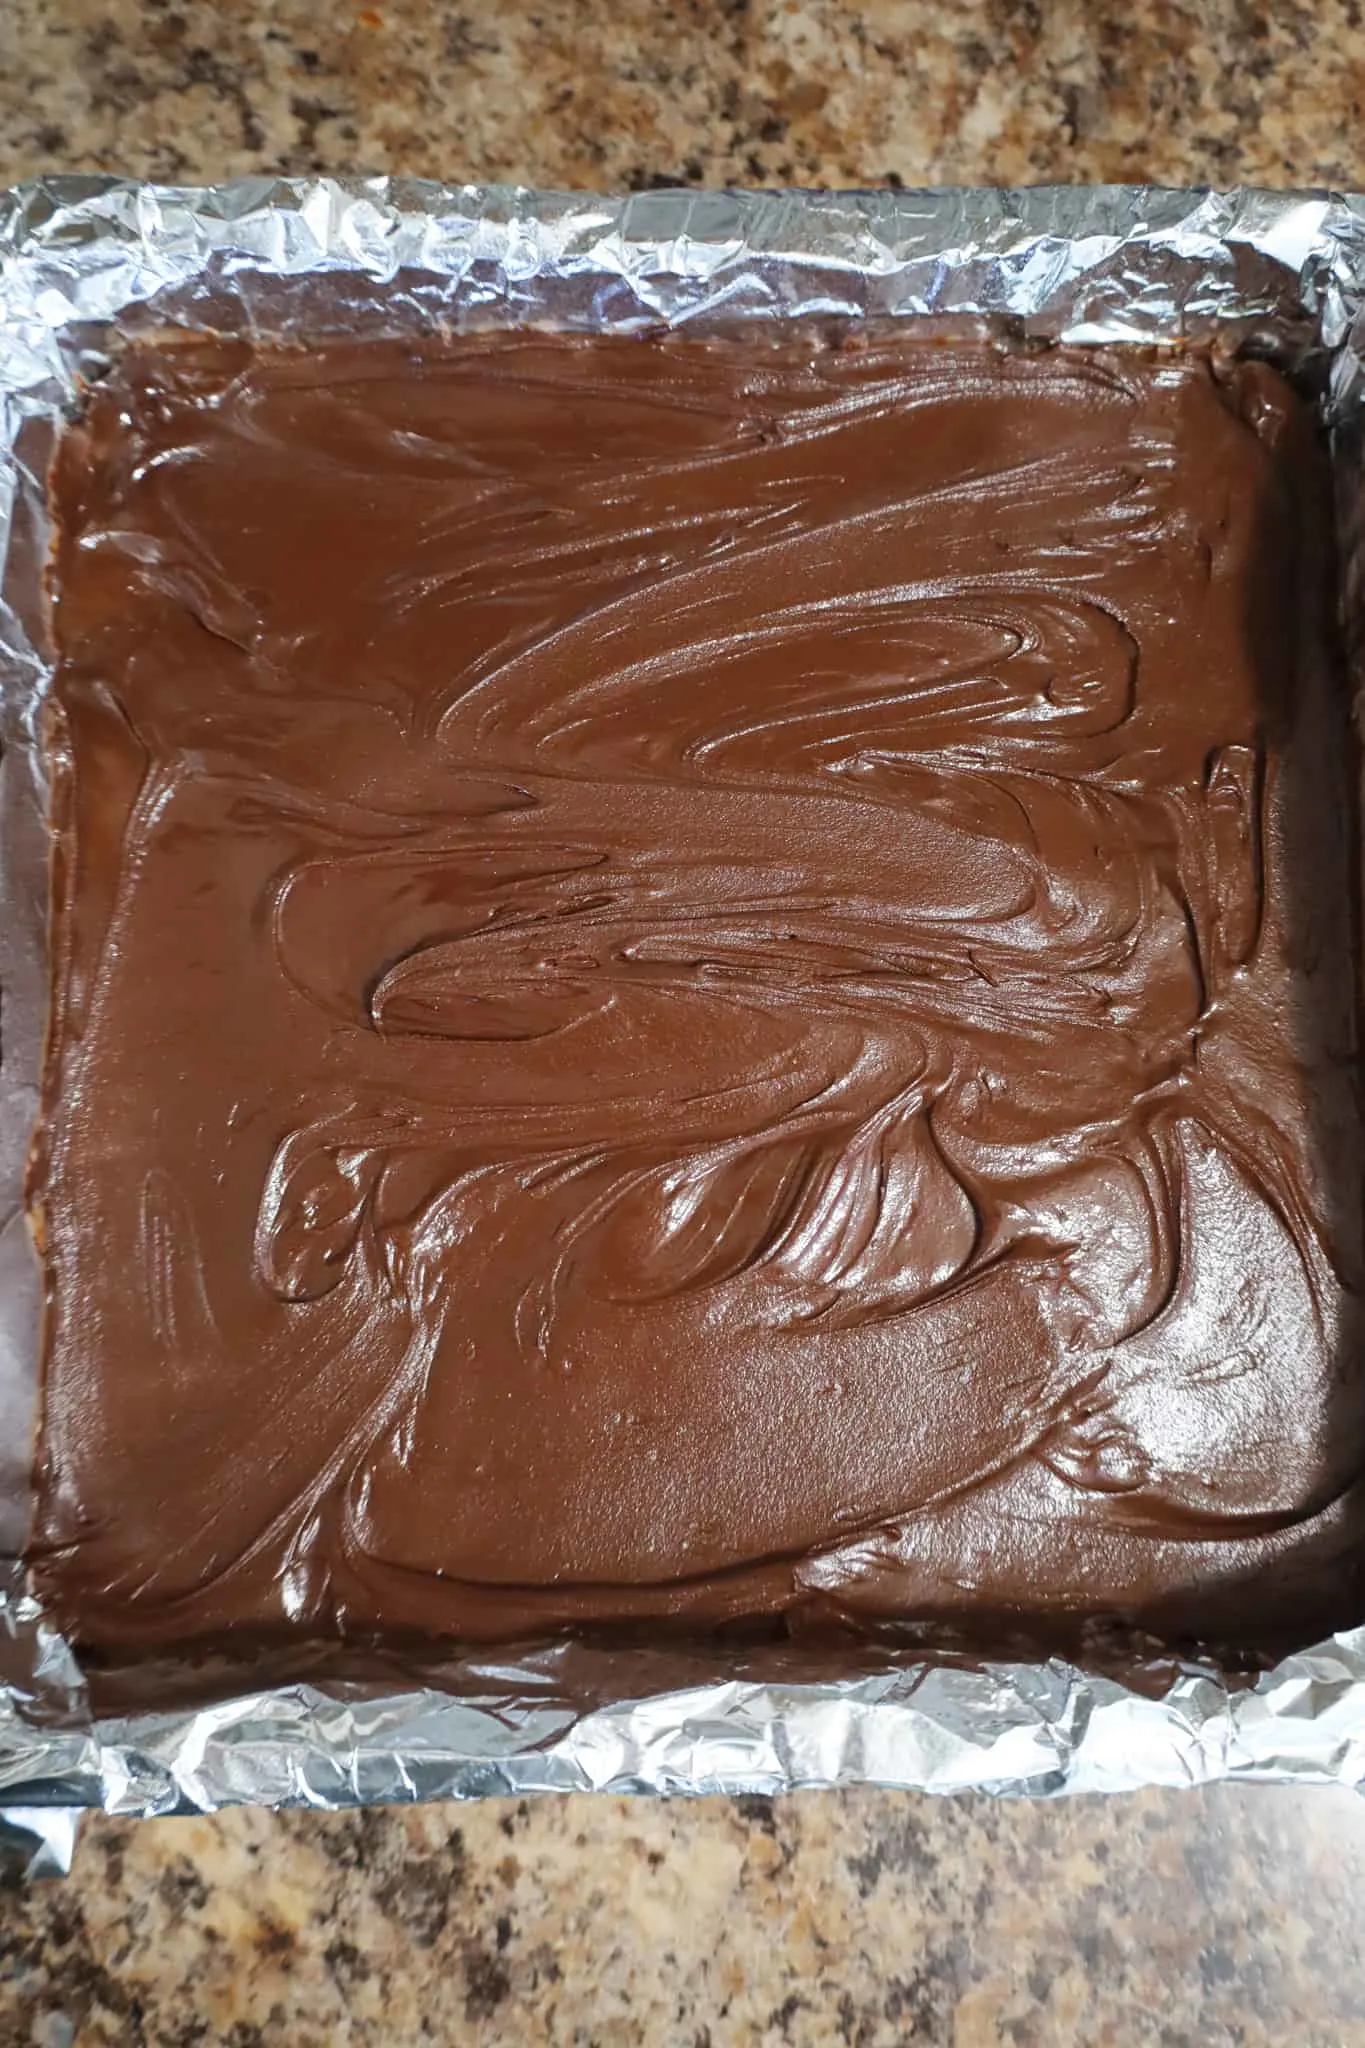 melted chocolate spread on top of peanut butter bars in a baking pan